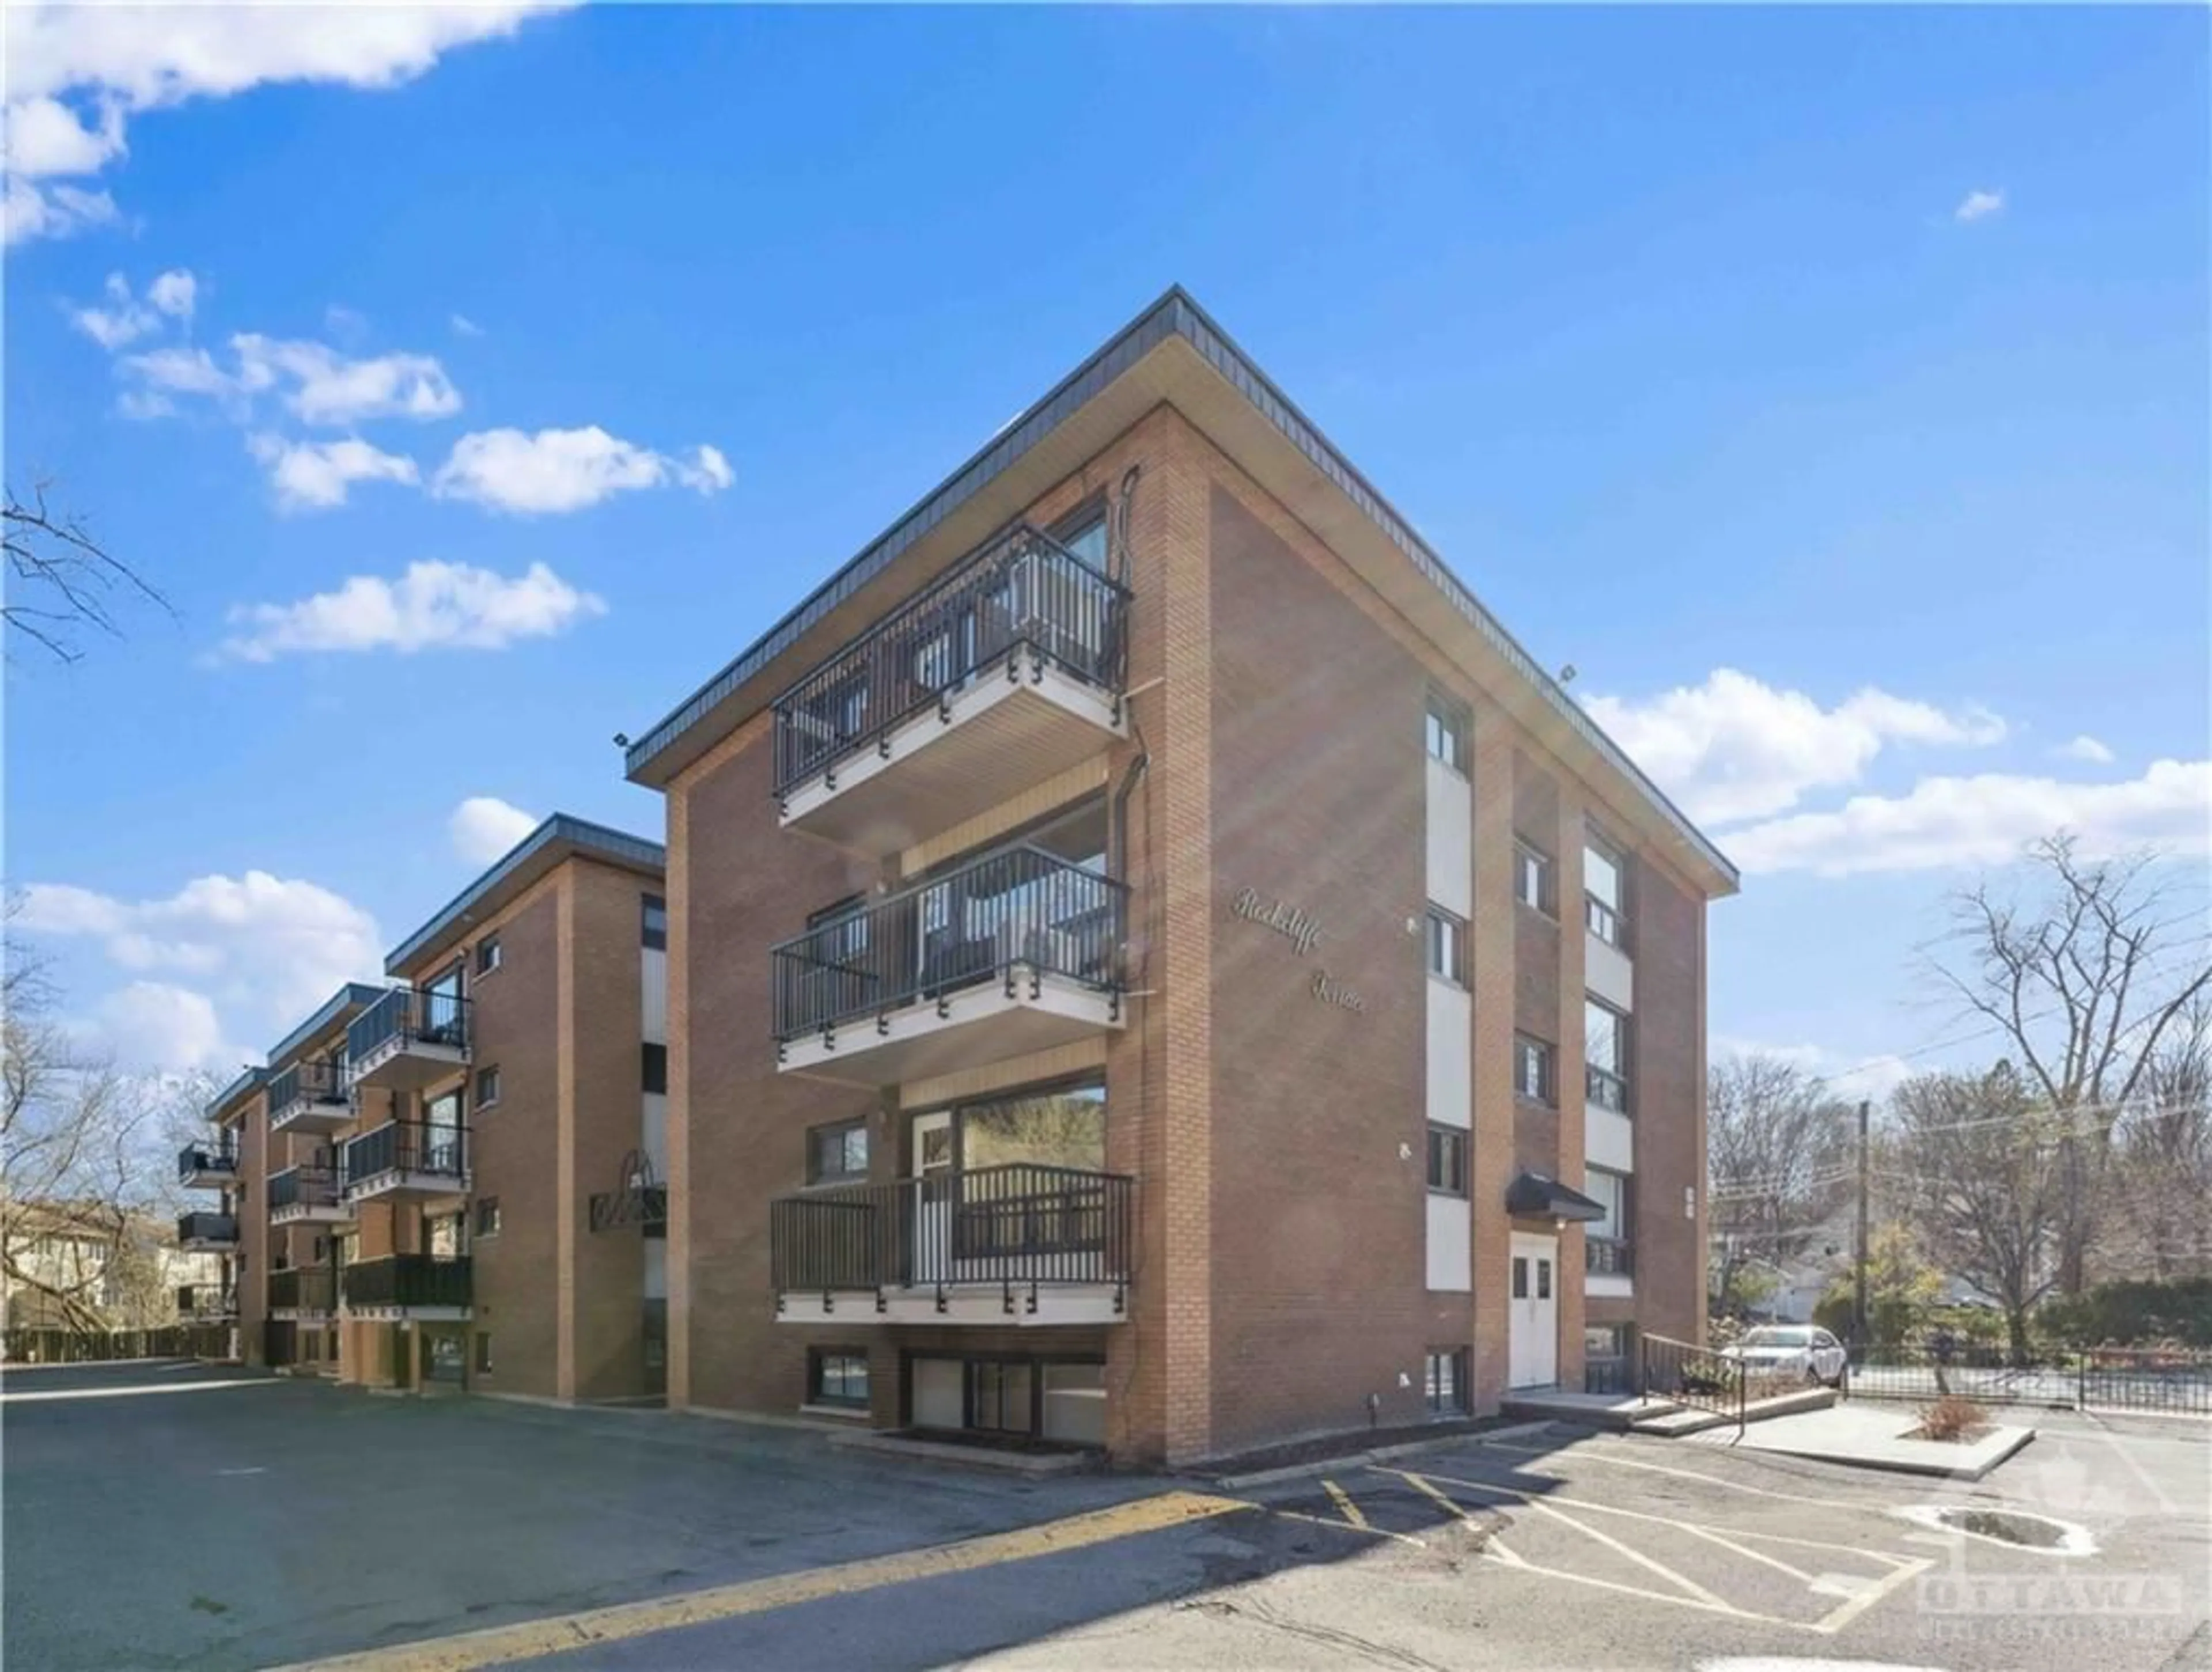 Outside view for 270 BEECHWOOD Ave #6, Ottawa Ontario K1L 8A6